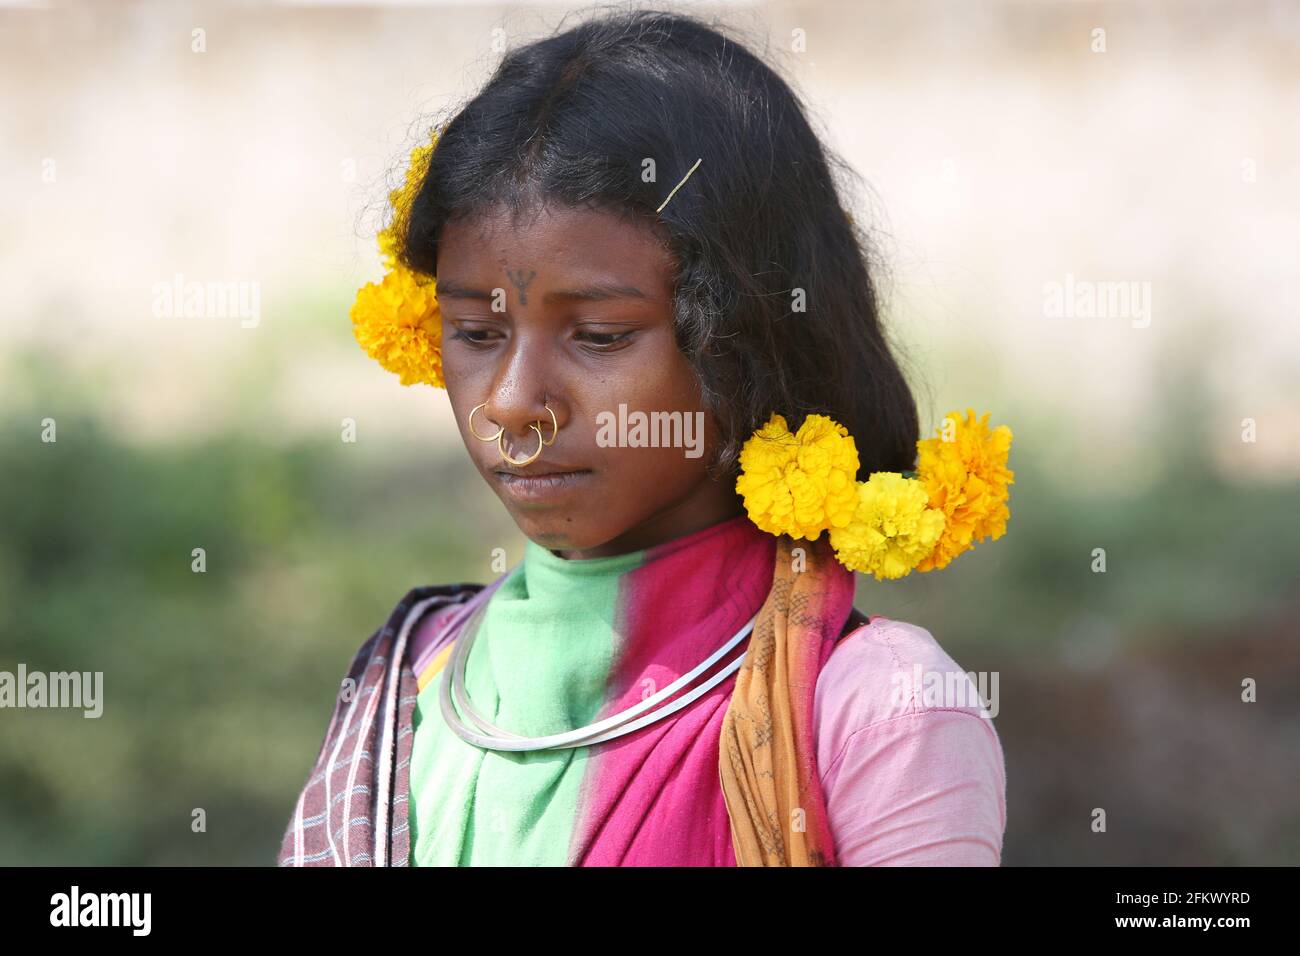 Tribal girl with traditional hair style with colorful flowers. DESIA KONDHA TRIBE. This picture was clicked at Lanjigadh village of Odisha, India. Fac Stock Photo